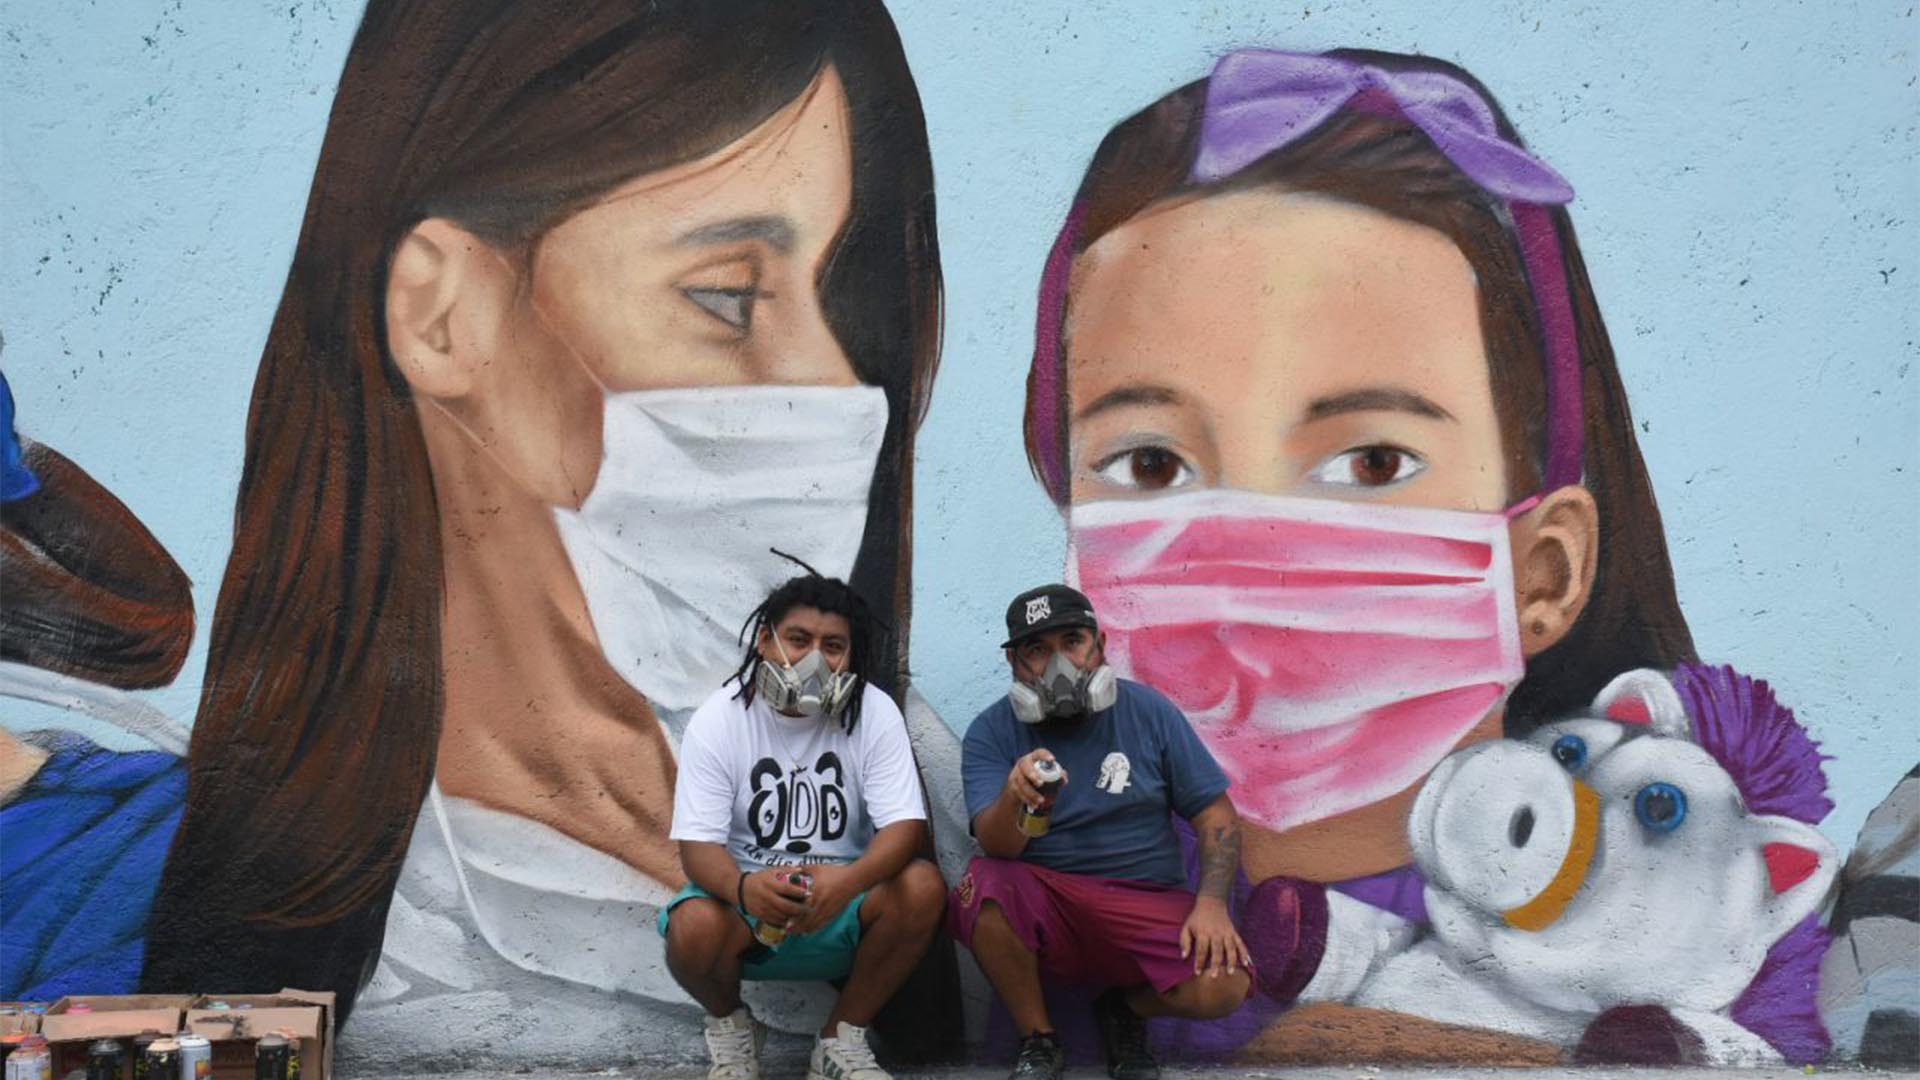 Mendez Gris and Blein Jiménez pose in front of the mural (Photo: Cuartoscuro)